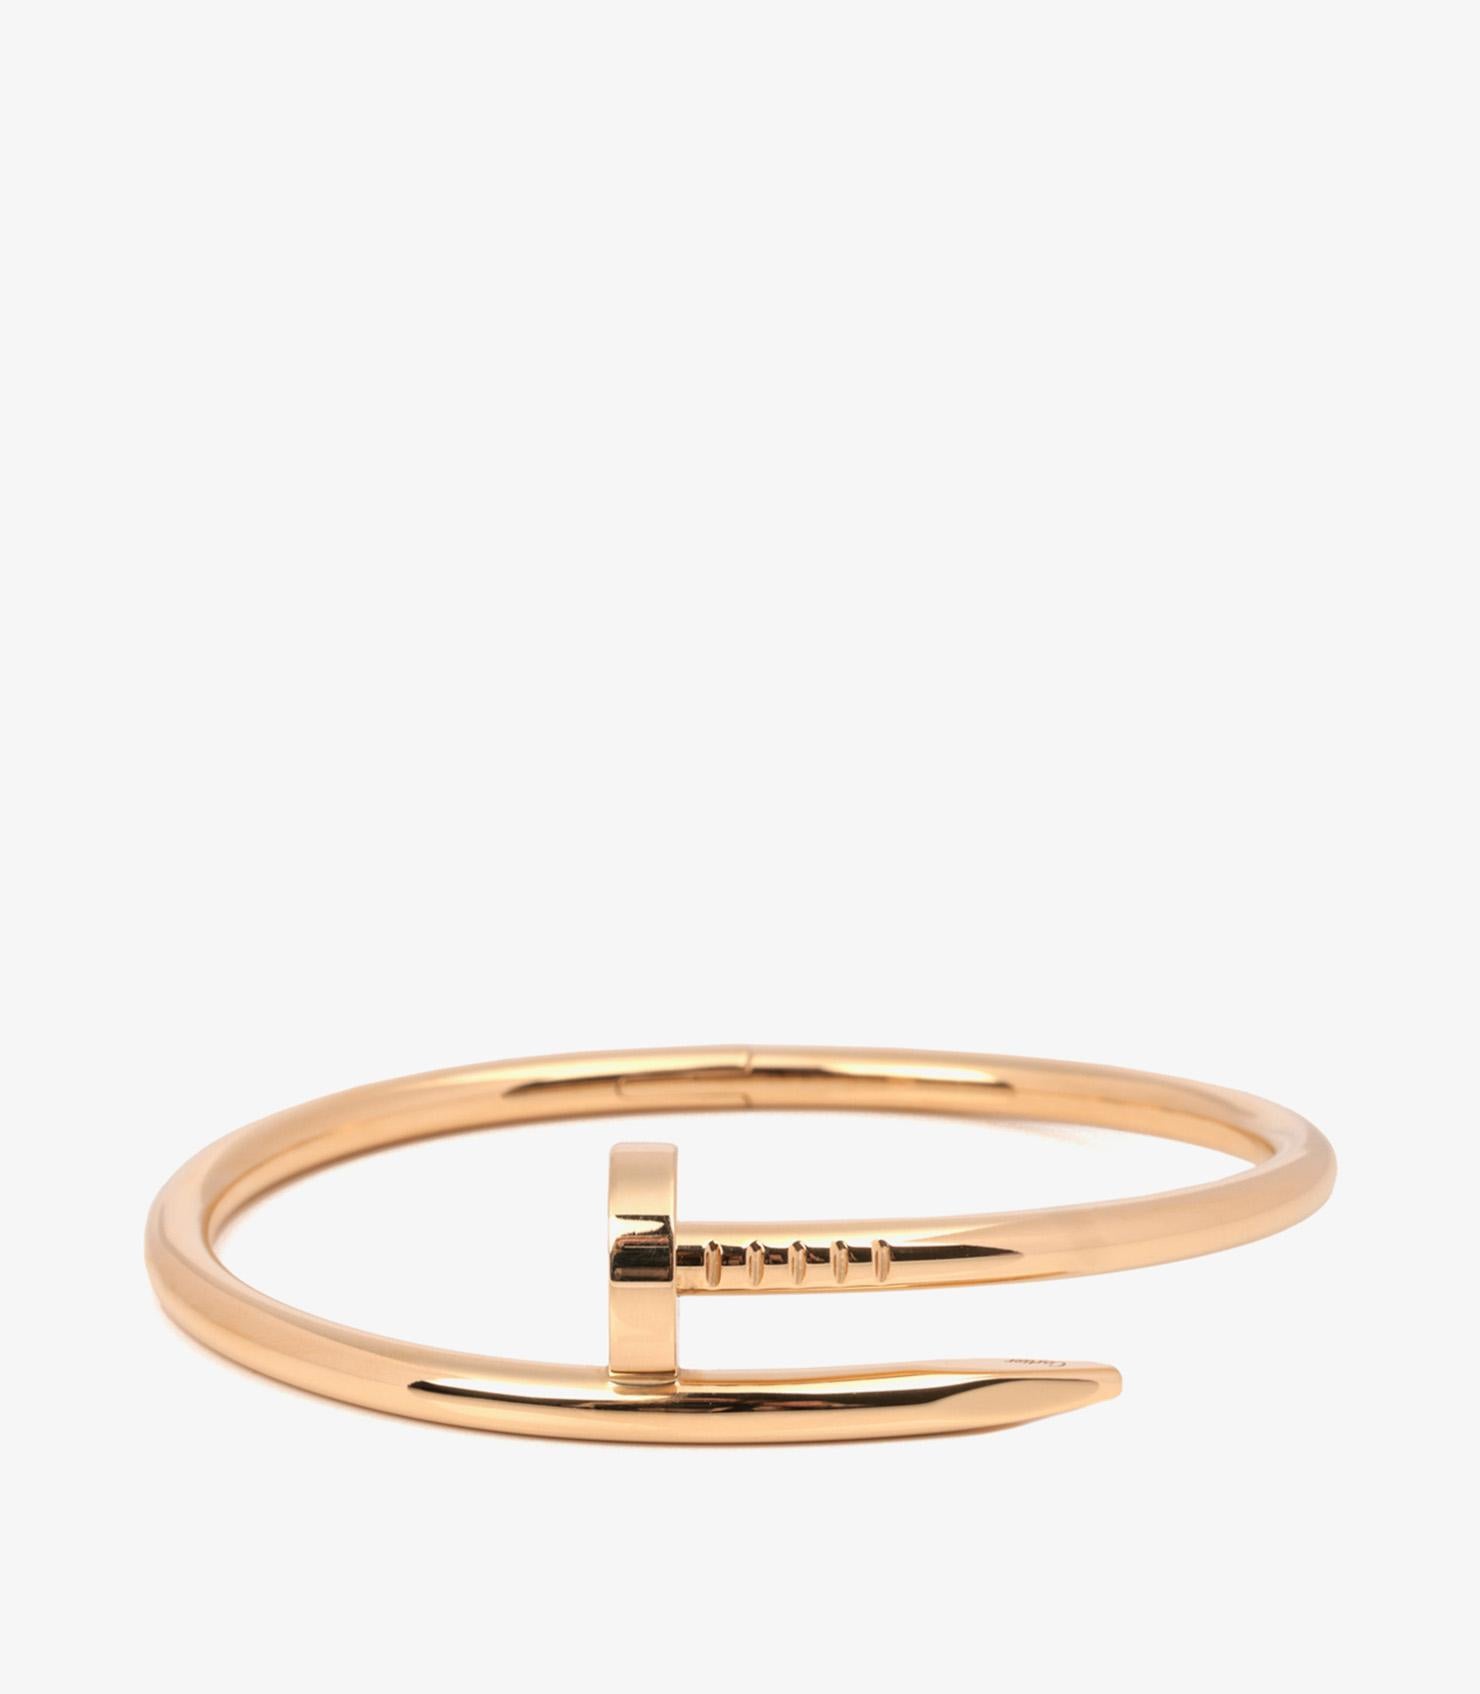 Cartier 18ct Yellow Gold Juste Un Clou Bracelet

Brand- Cartier
Model- Juste un Clou Bracelet
Product Type- Bracelet
Serial Number- HKG195
Age- Circa 2019
Accompanied By- Cartier Box, Certificate
Material(s)- 18ct Yellow Gold

Bracelet Length-